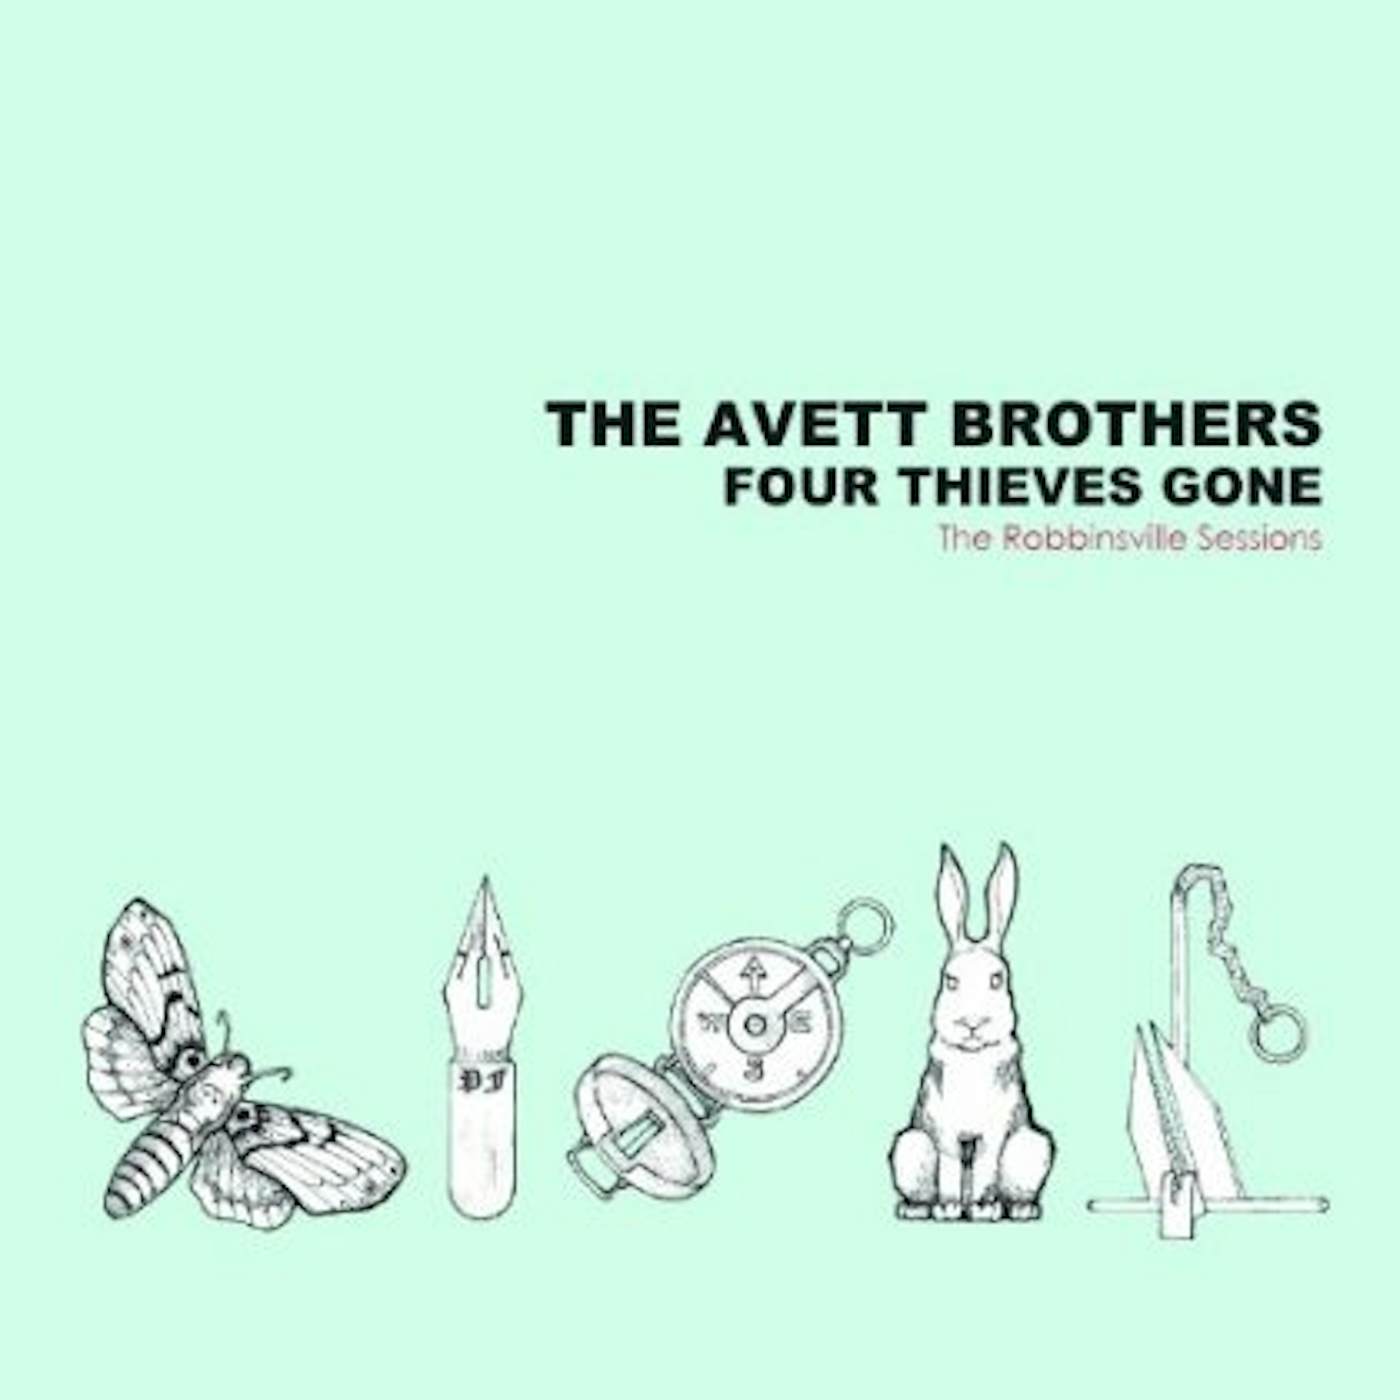 The Avett Brothers FOUR THIEVES GONE: ROBBINSVILLE SESSIONS Vinyl Record